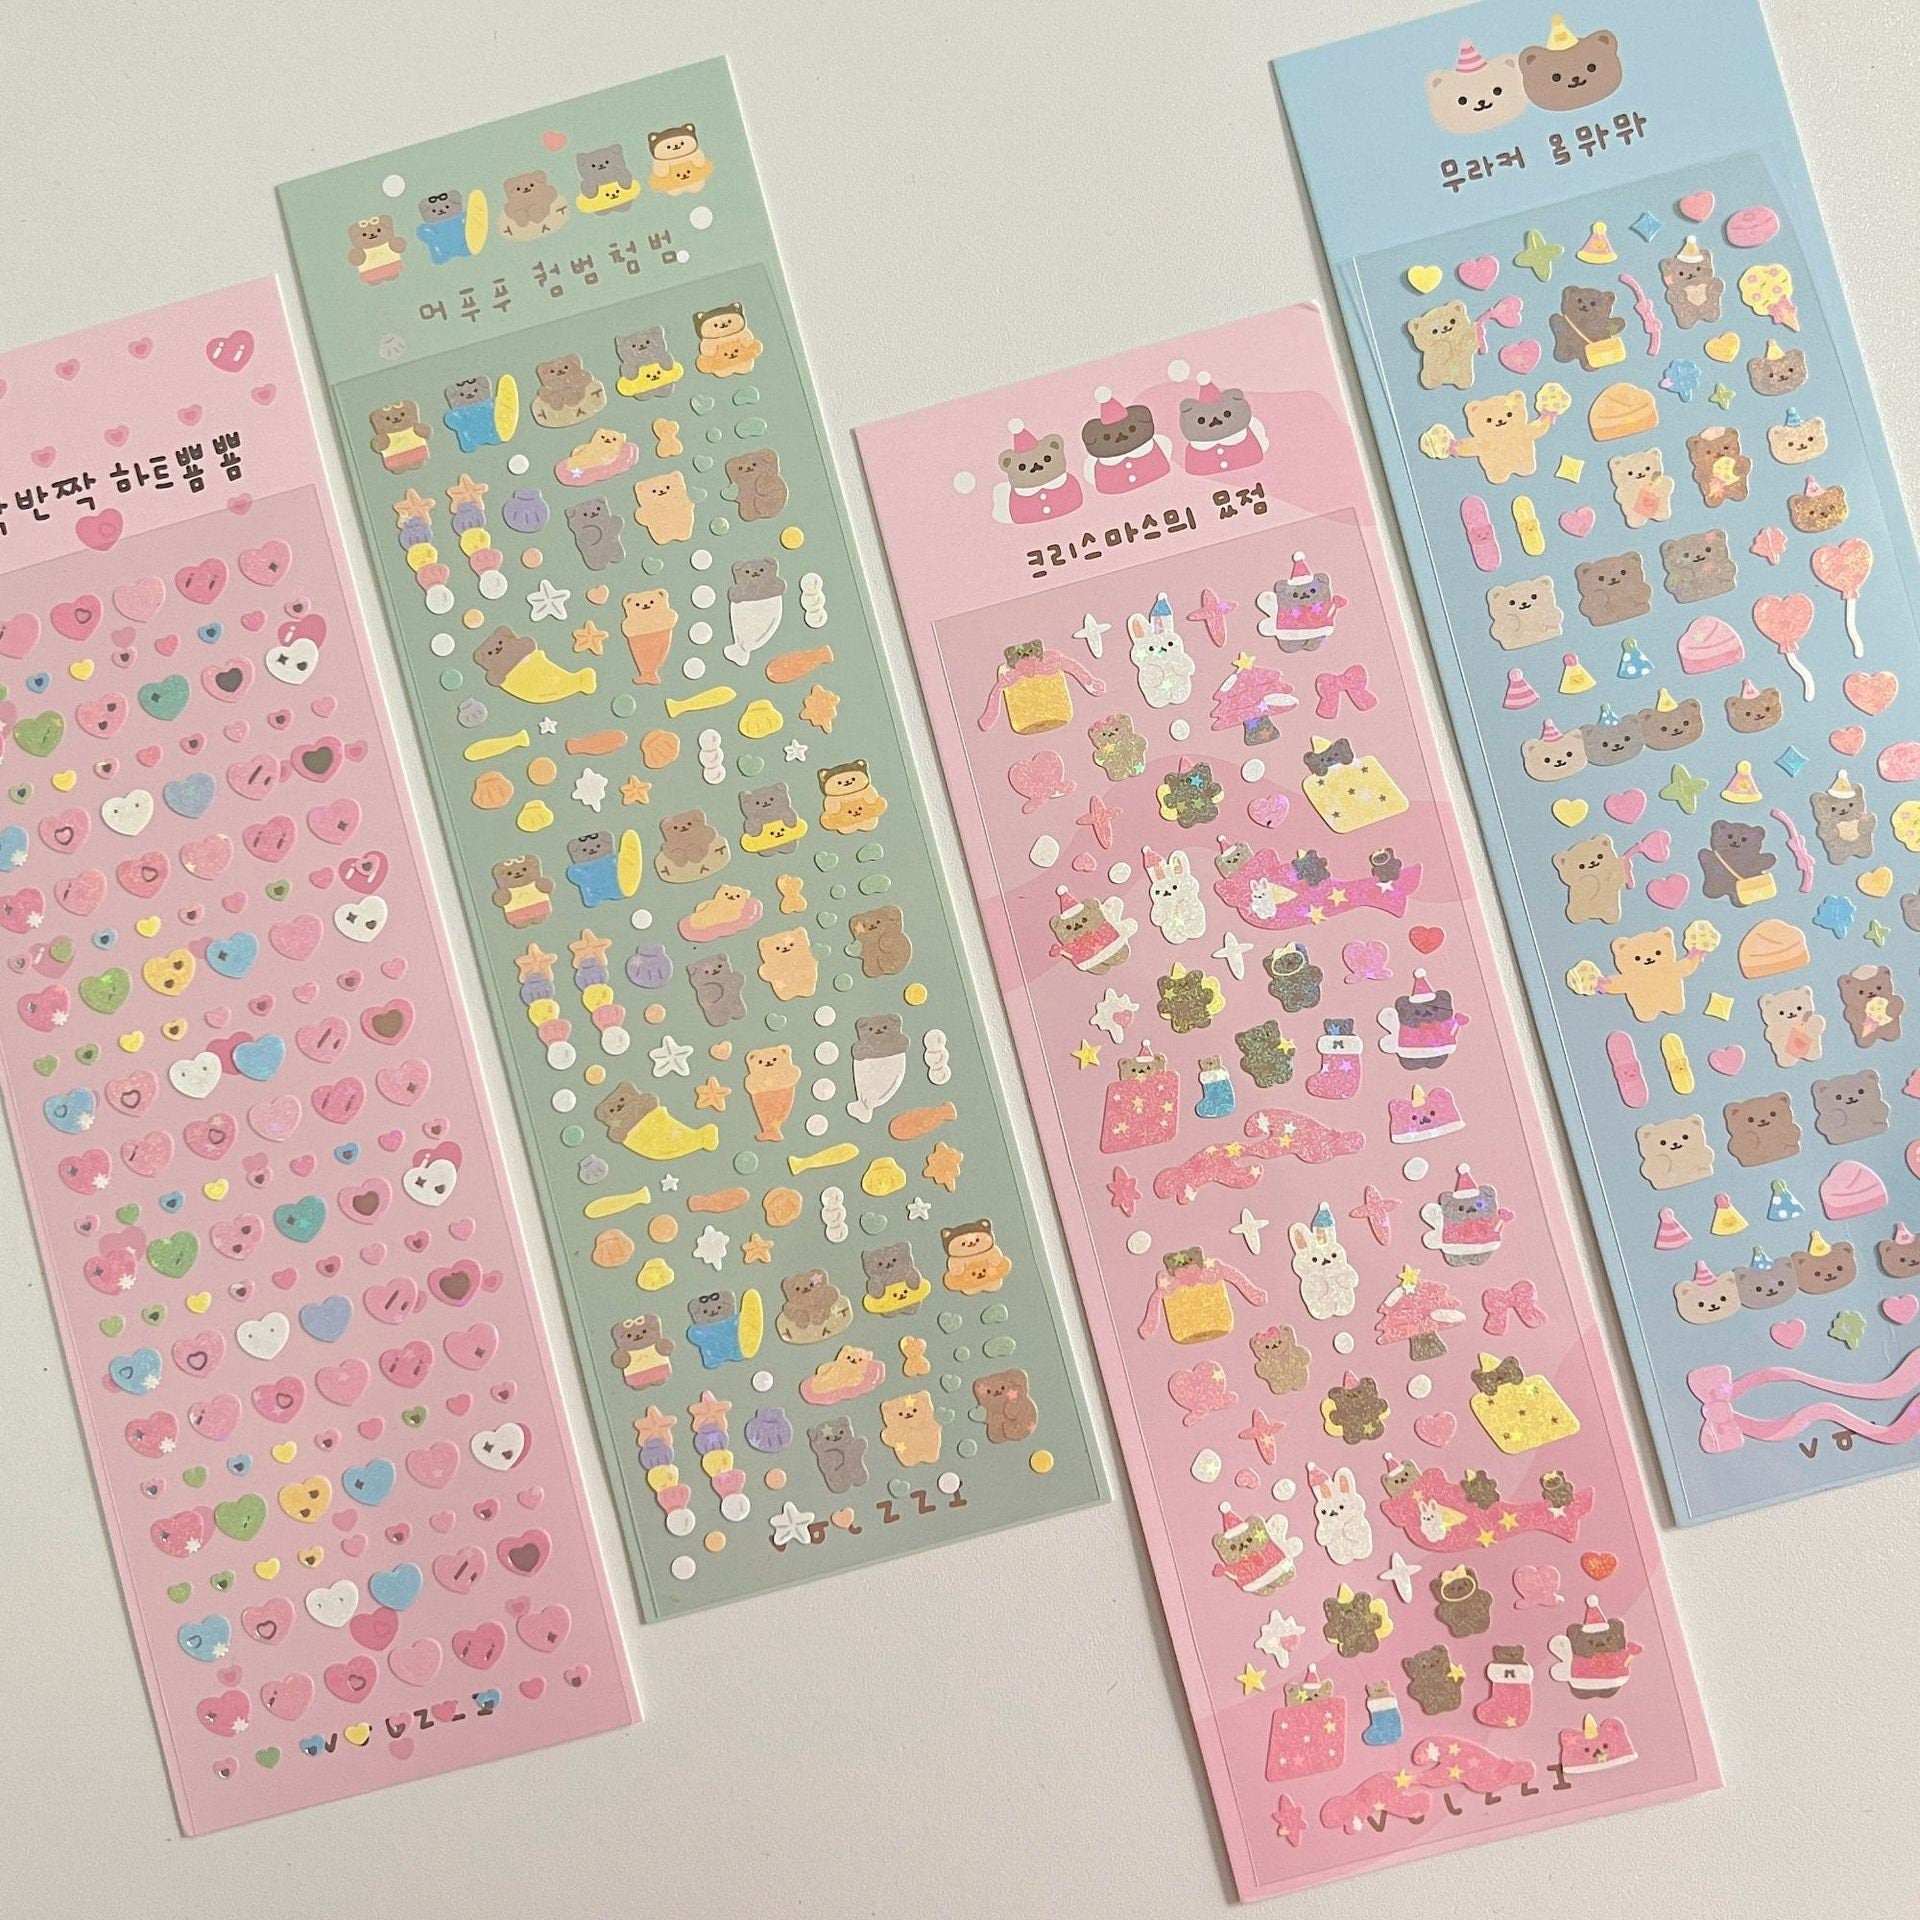 Kawaii Toploader Deco Stickers, Card Making Stickers, Bling Bling